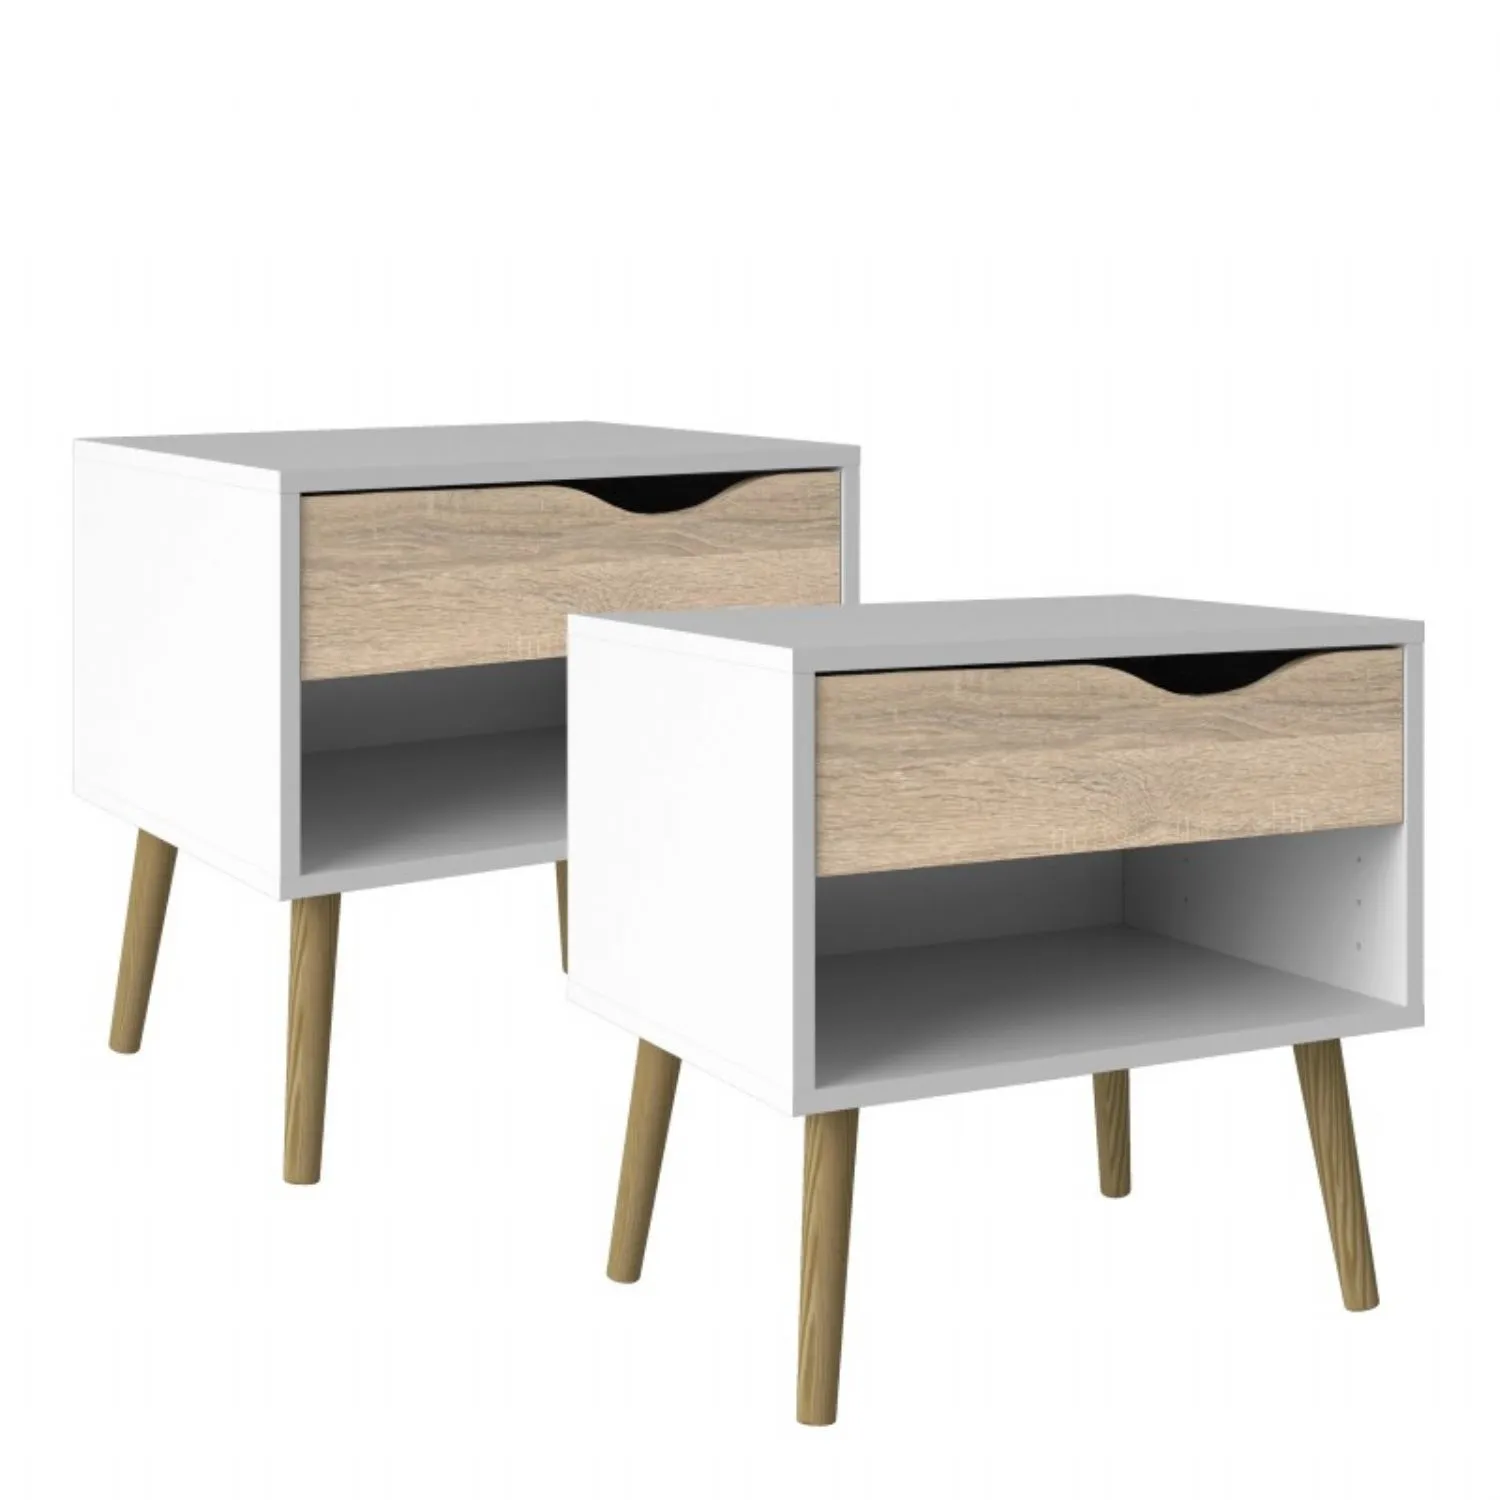 Set of 2 White and Oak 1 Drawer Bedside Tables with Shelf